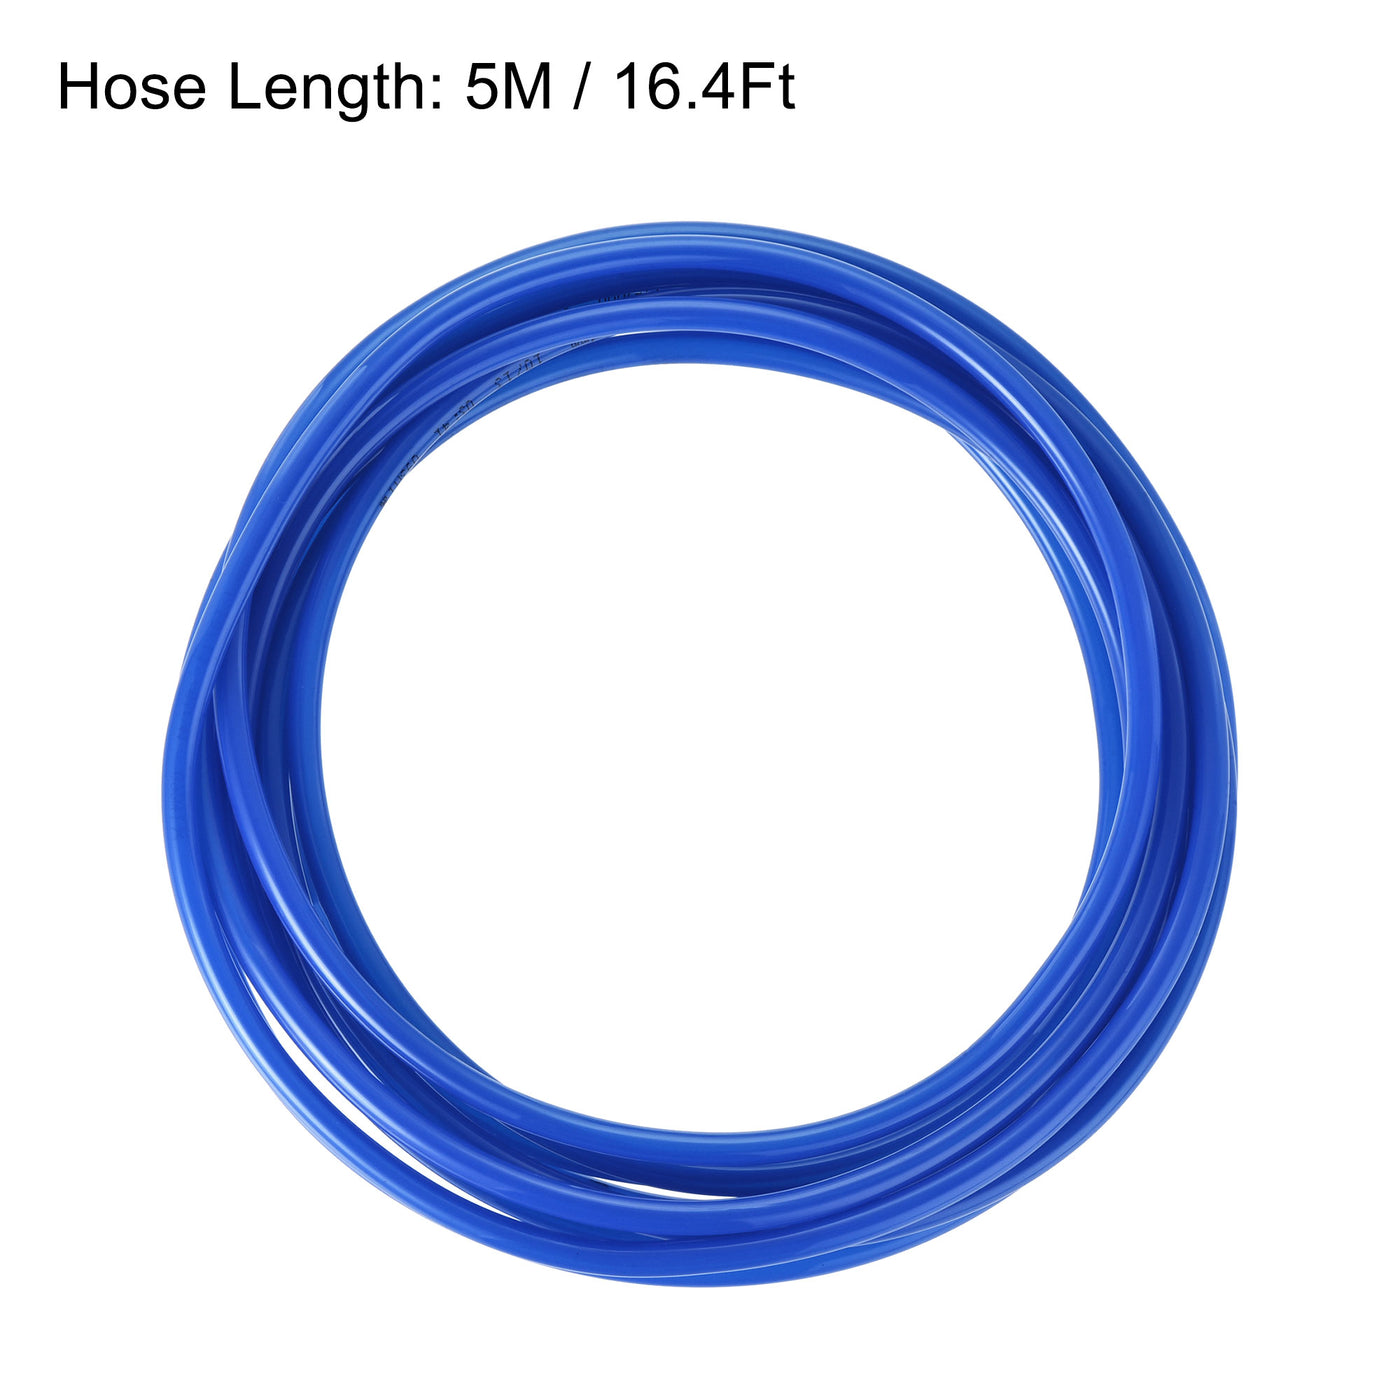 uxcell Uxcell Pneumatic 6mm OD PU Air Hose Tubing Kit 5 Meters Blue with 12 Pcs Push to Connect Fittings